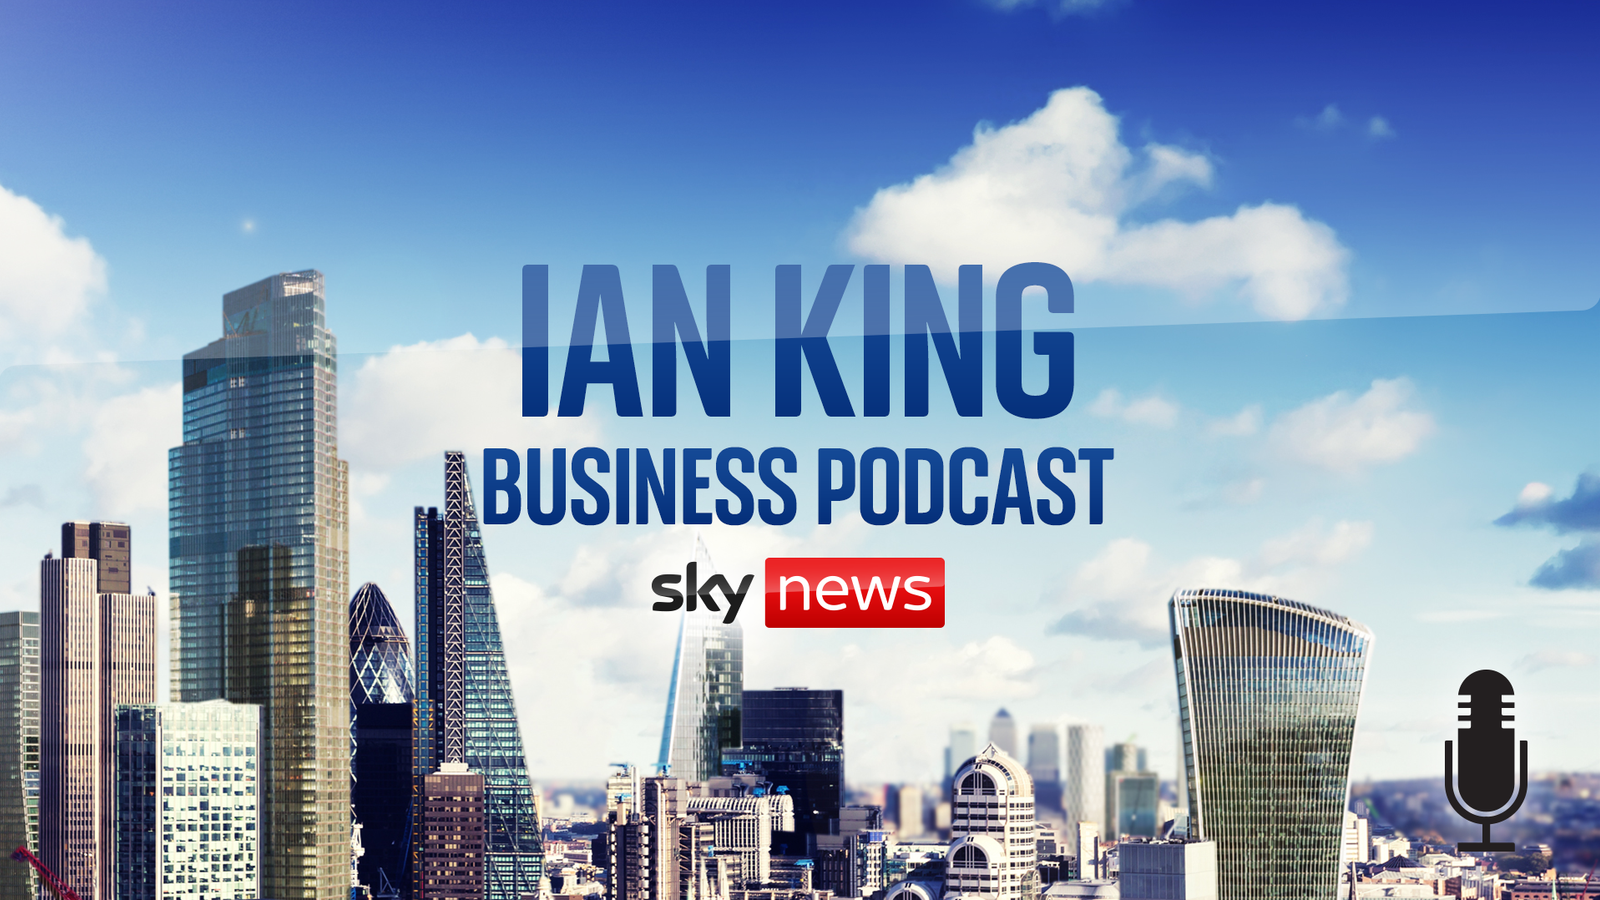 Ian King Business Podcast: Energy prices fall, consumer confidence, and mergers and acquisitions